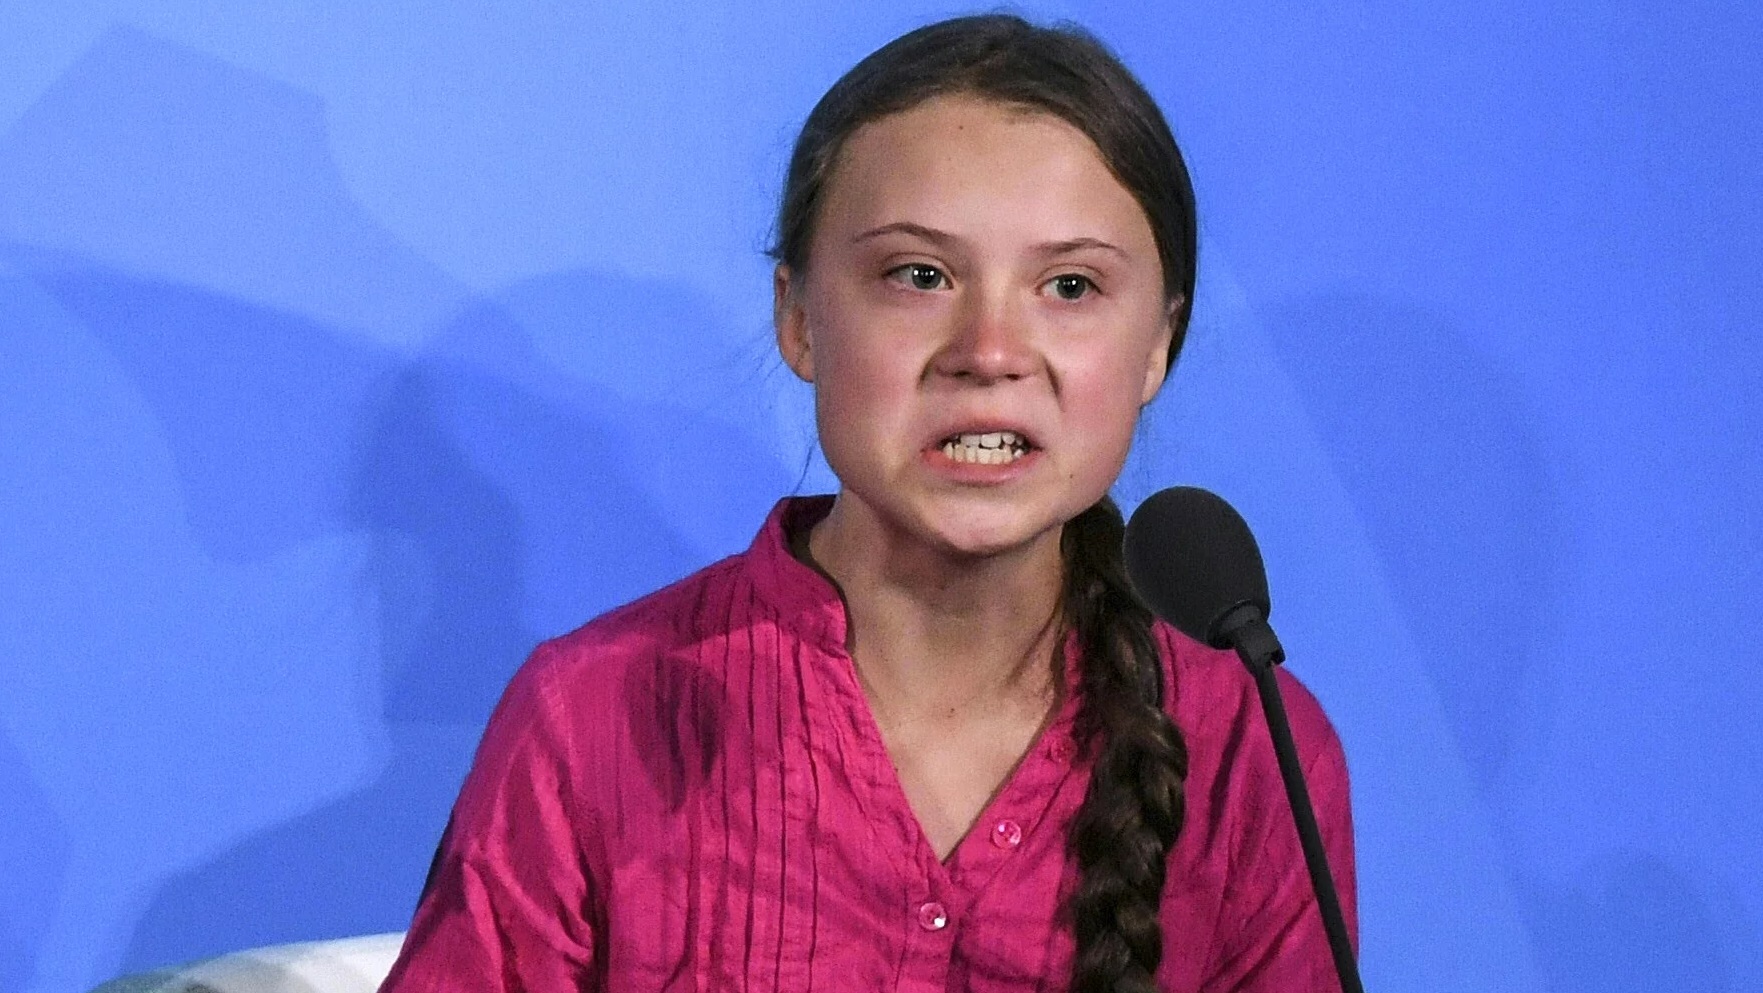 More climate lies: Greta Thunberg’s yacht uses more fuel than a commercial airplane to travel similar distances